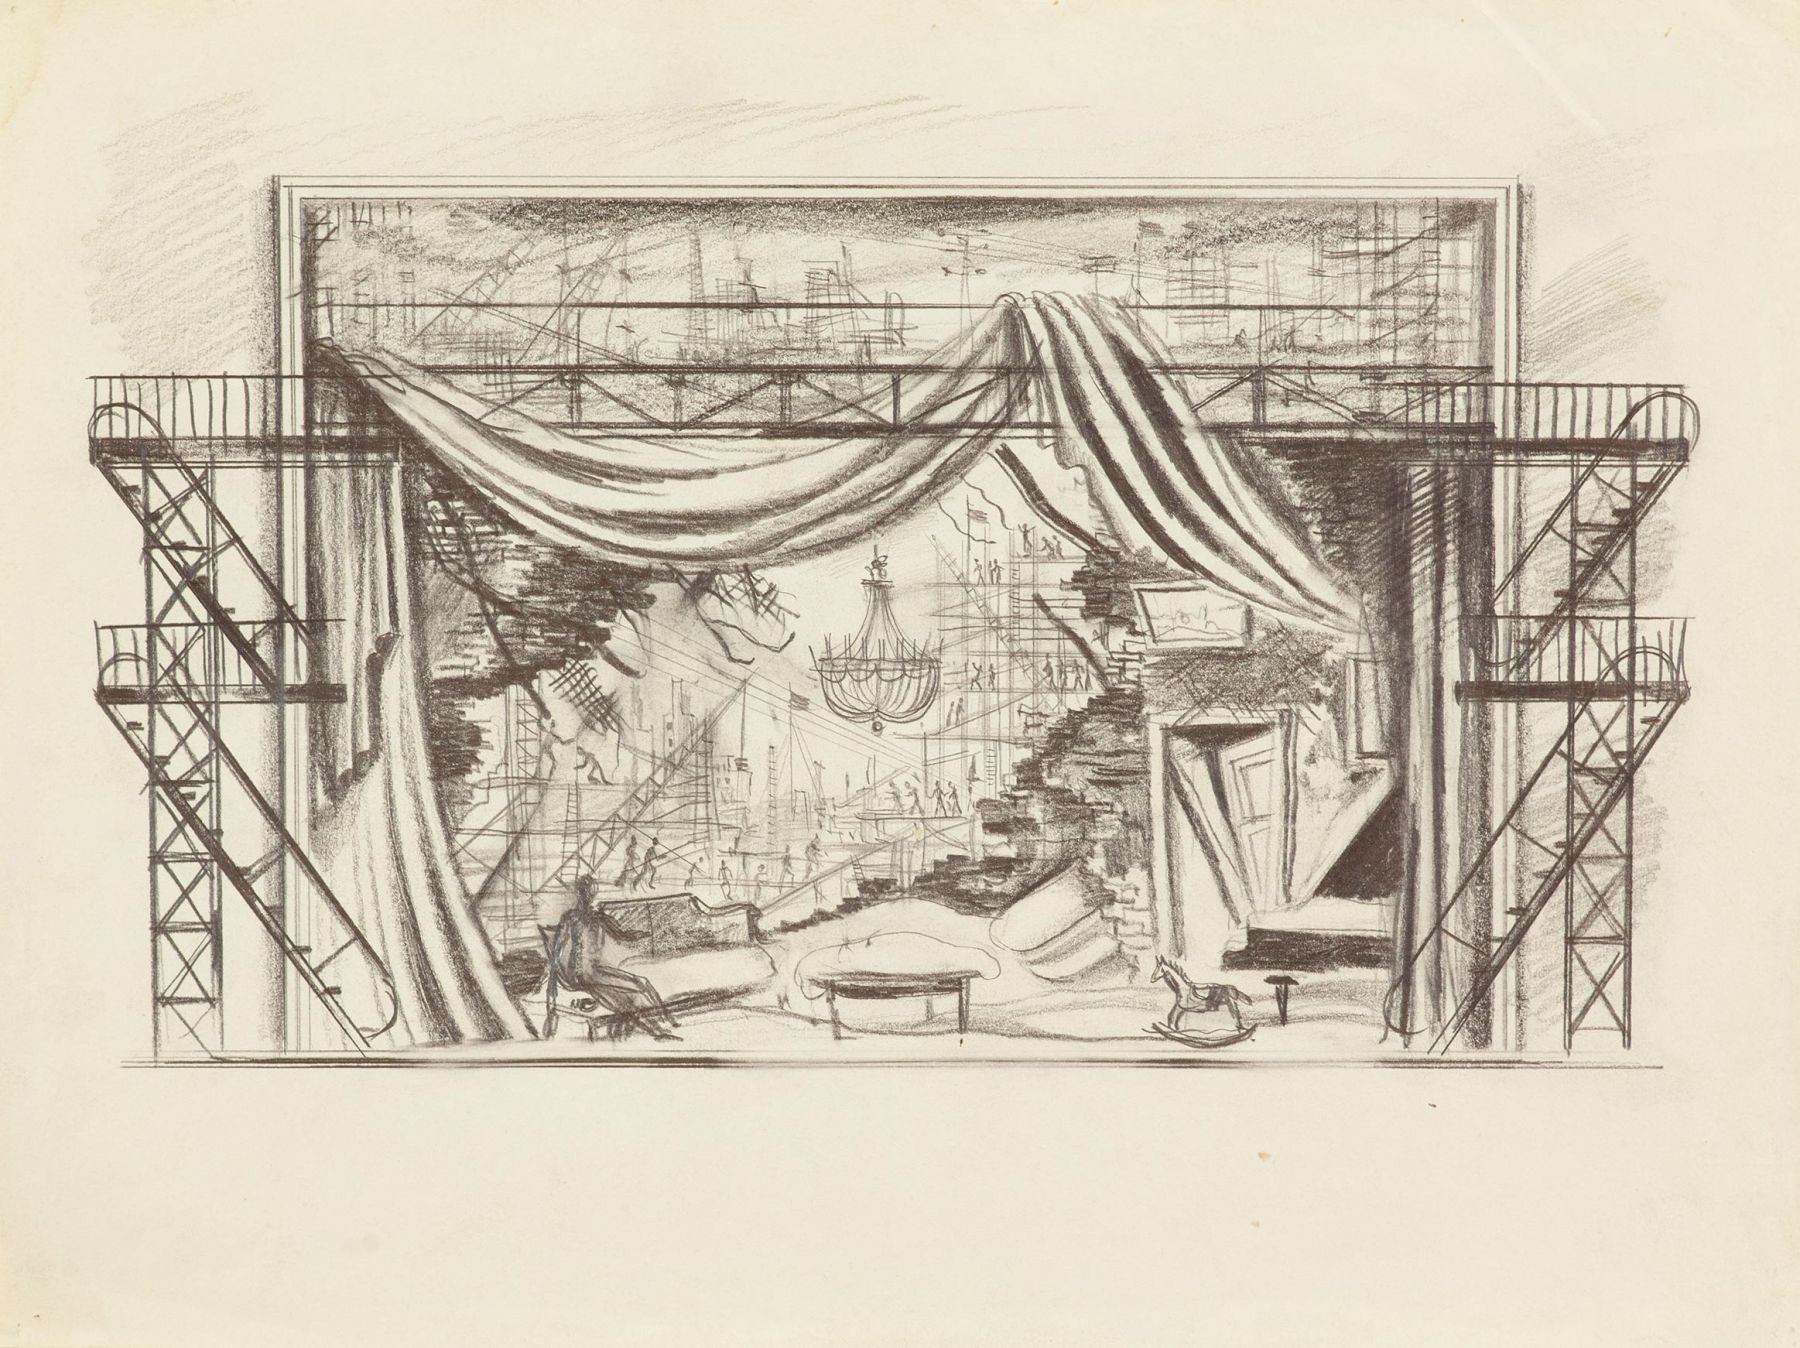 Sketch of theatrical scenery.